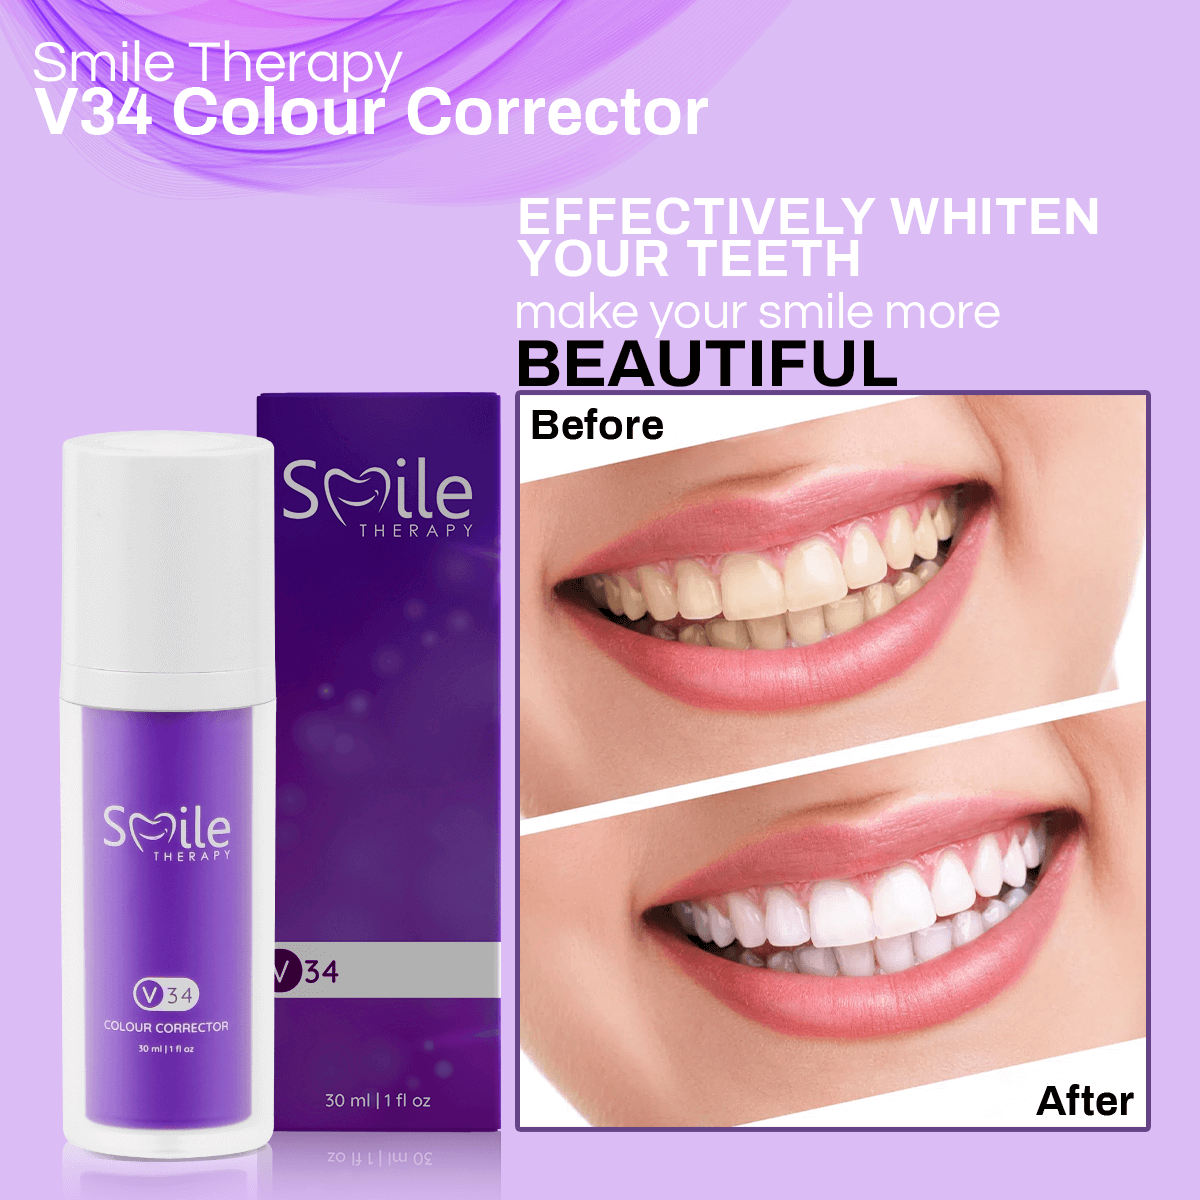 V34 Colour Corrector | Purple Teeth Whitening Toothpaste | Advanced Stain Removal - Smile Therapy